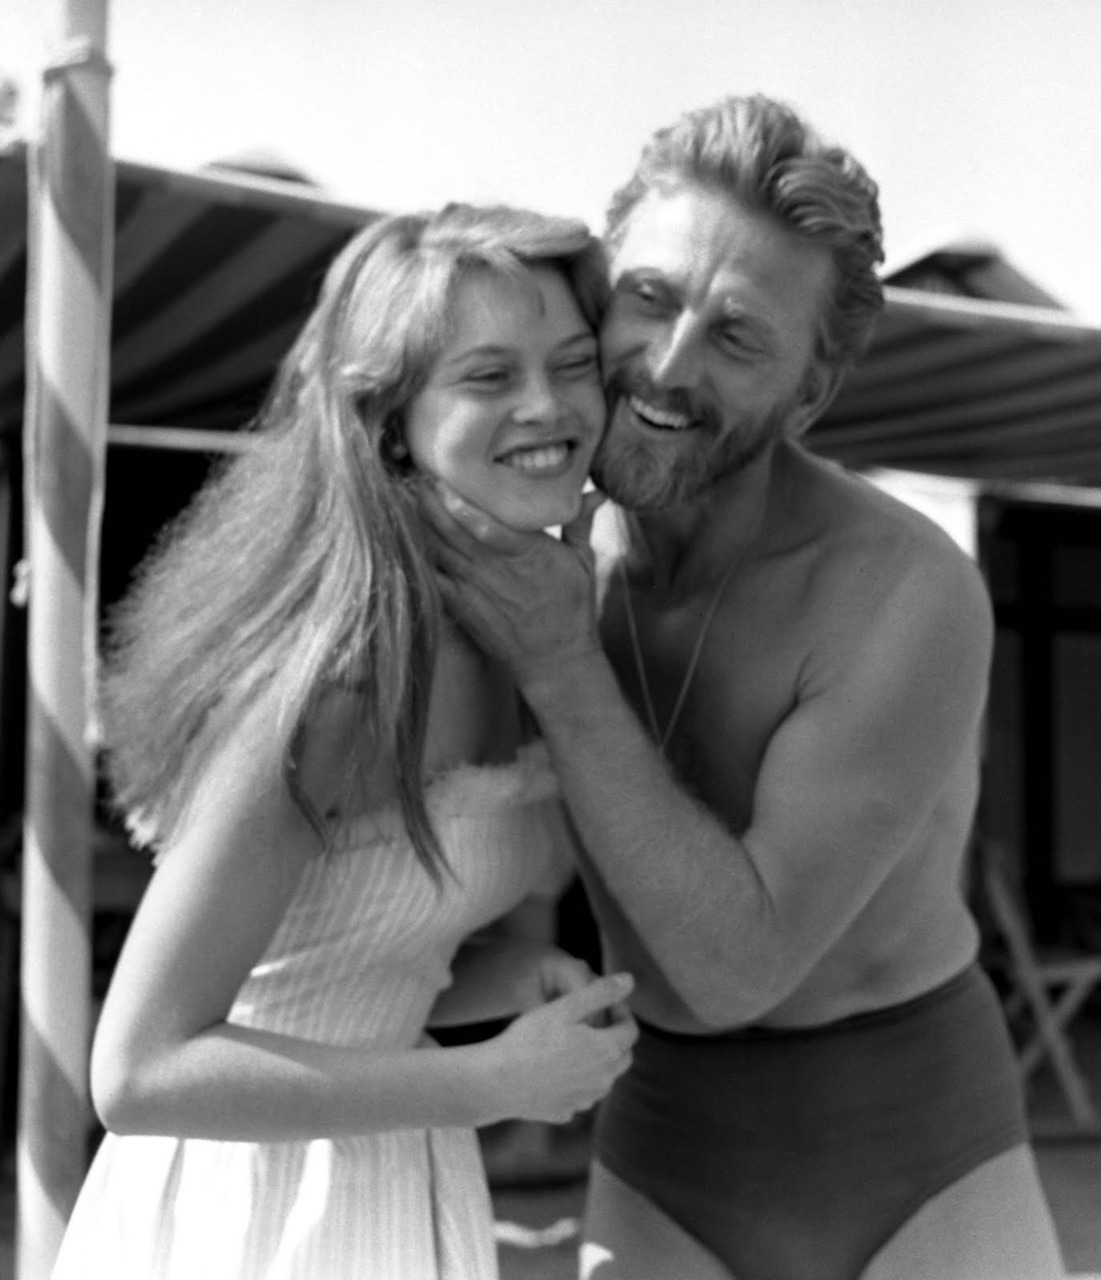 Brigitte Bardot goofing off with Kirk Douglas at the Cannes Film Festival in 1953. Douglas is still going strong at age 100, has been happily married for 63 years with 4 successful boys.